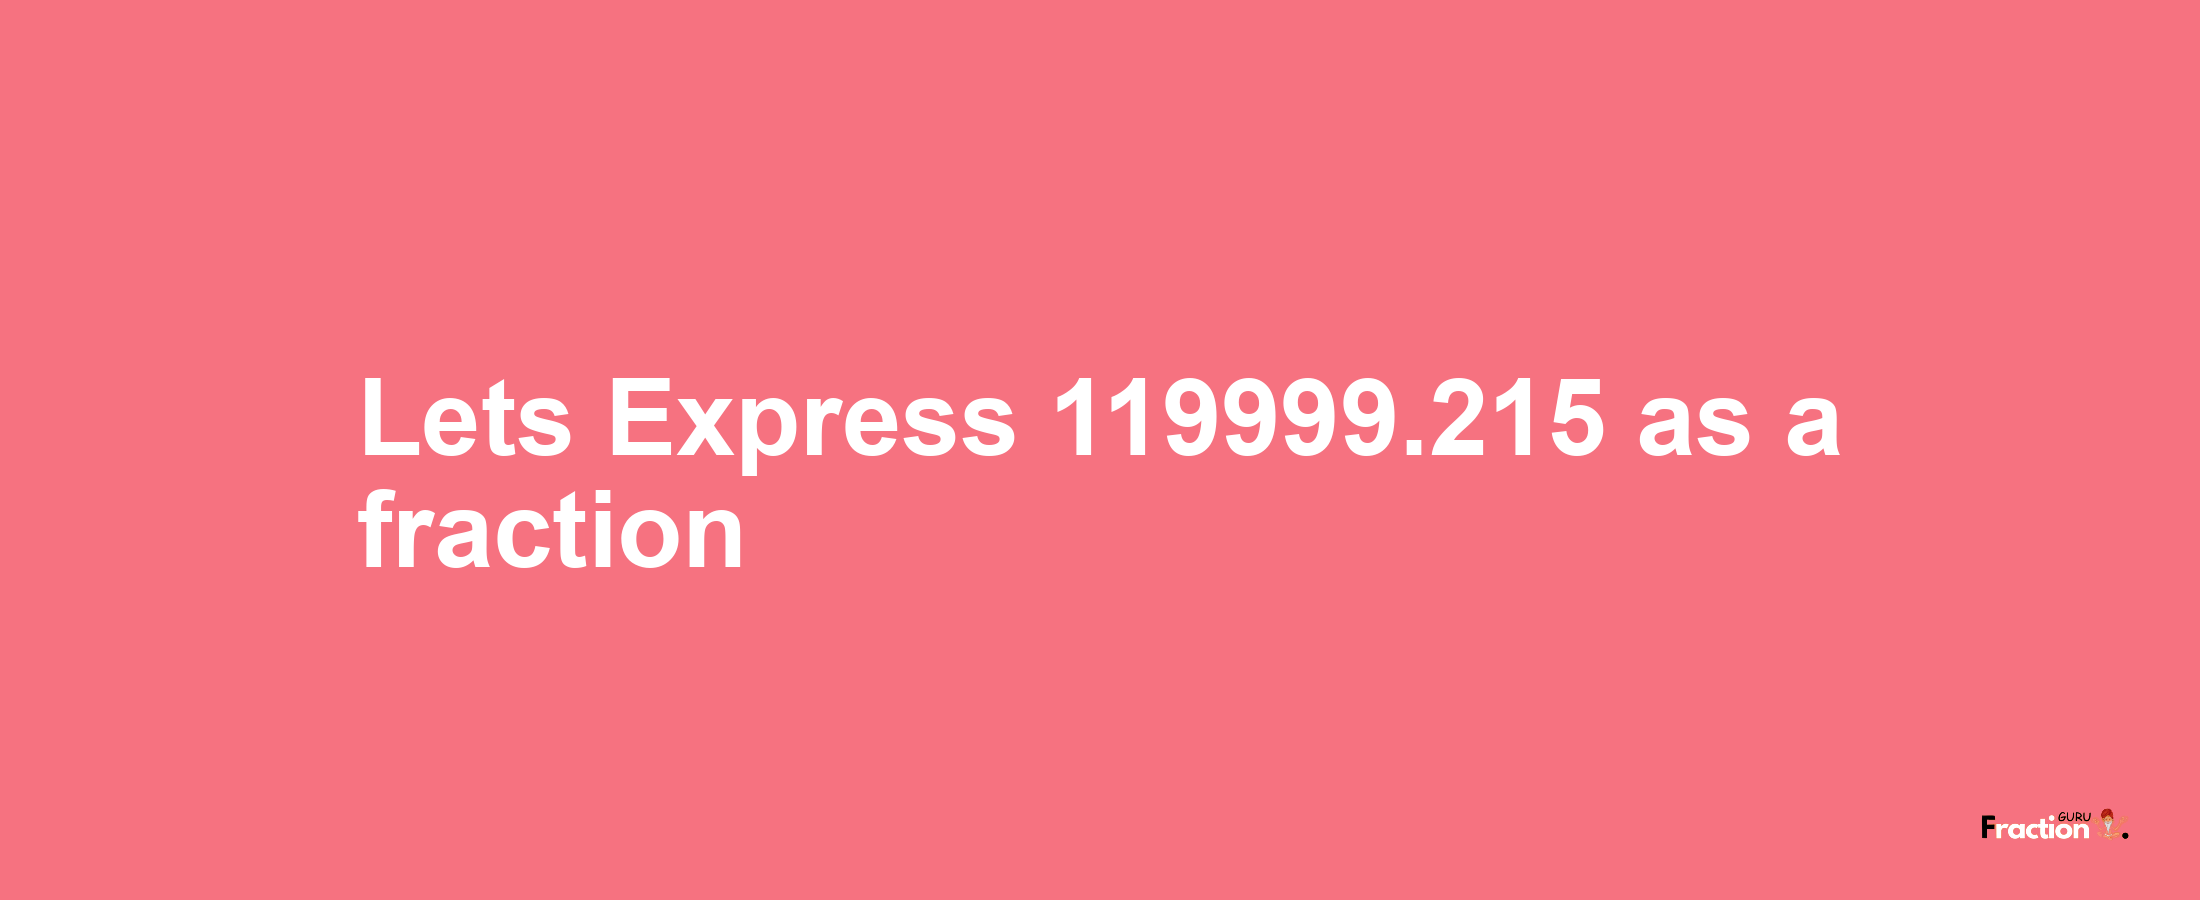 Lets Express 119999.215 as afraction